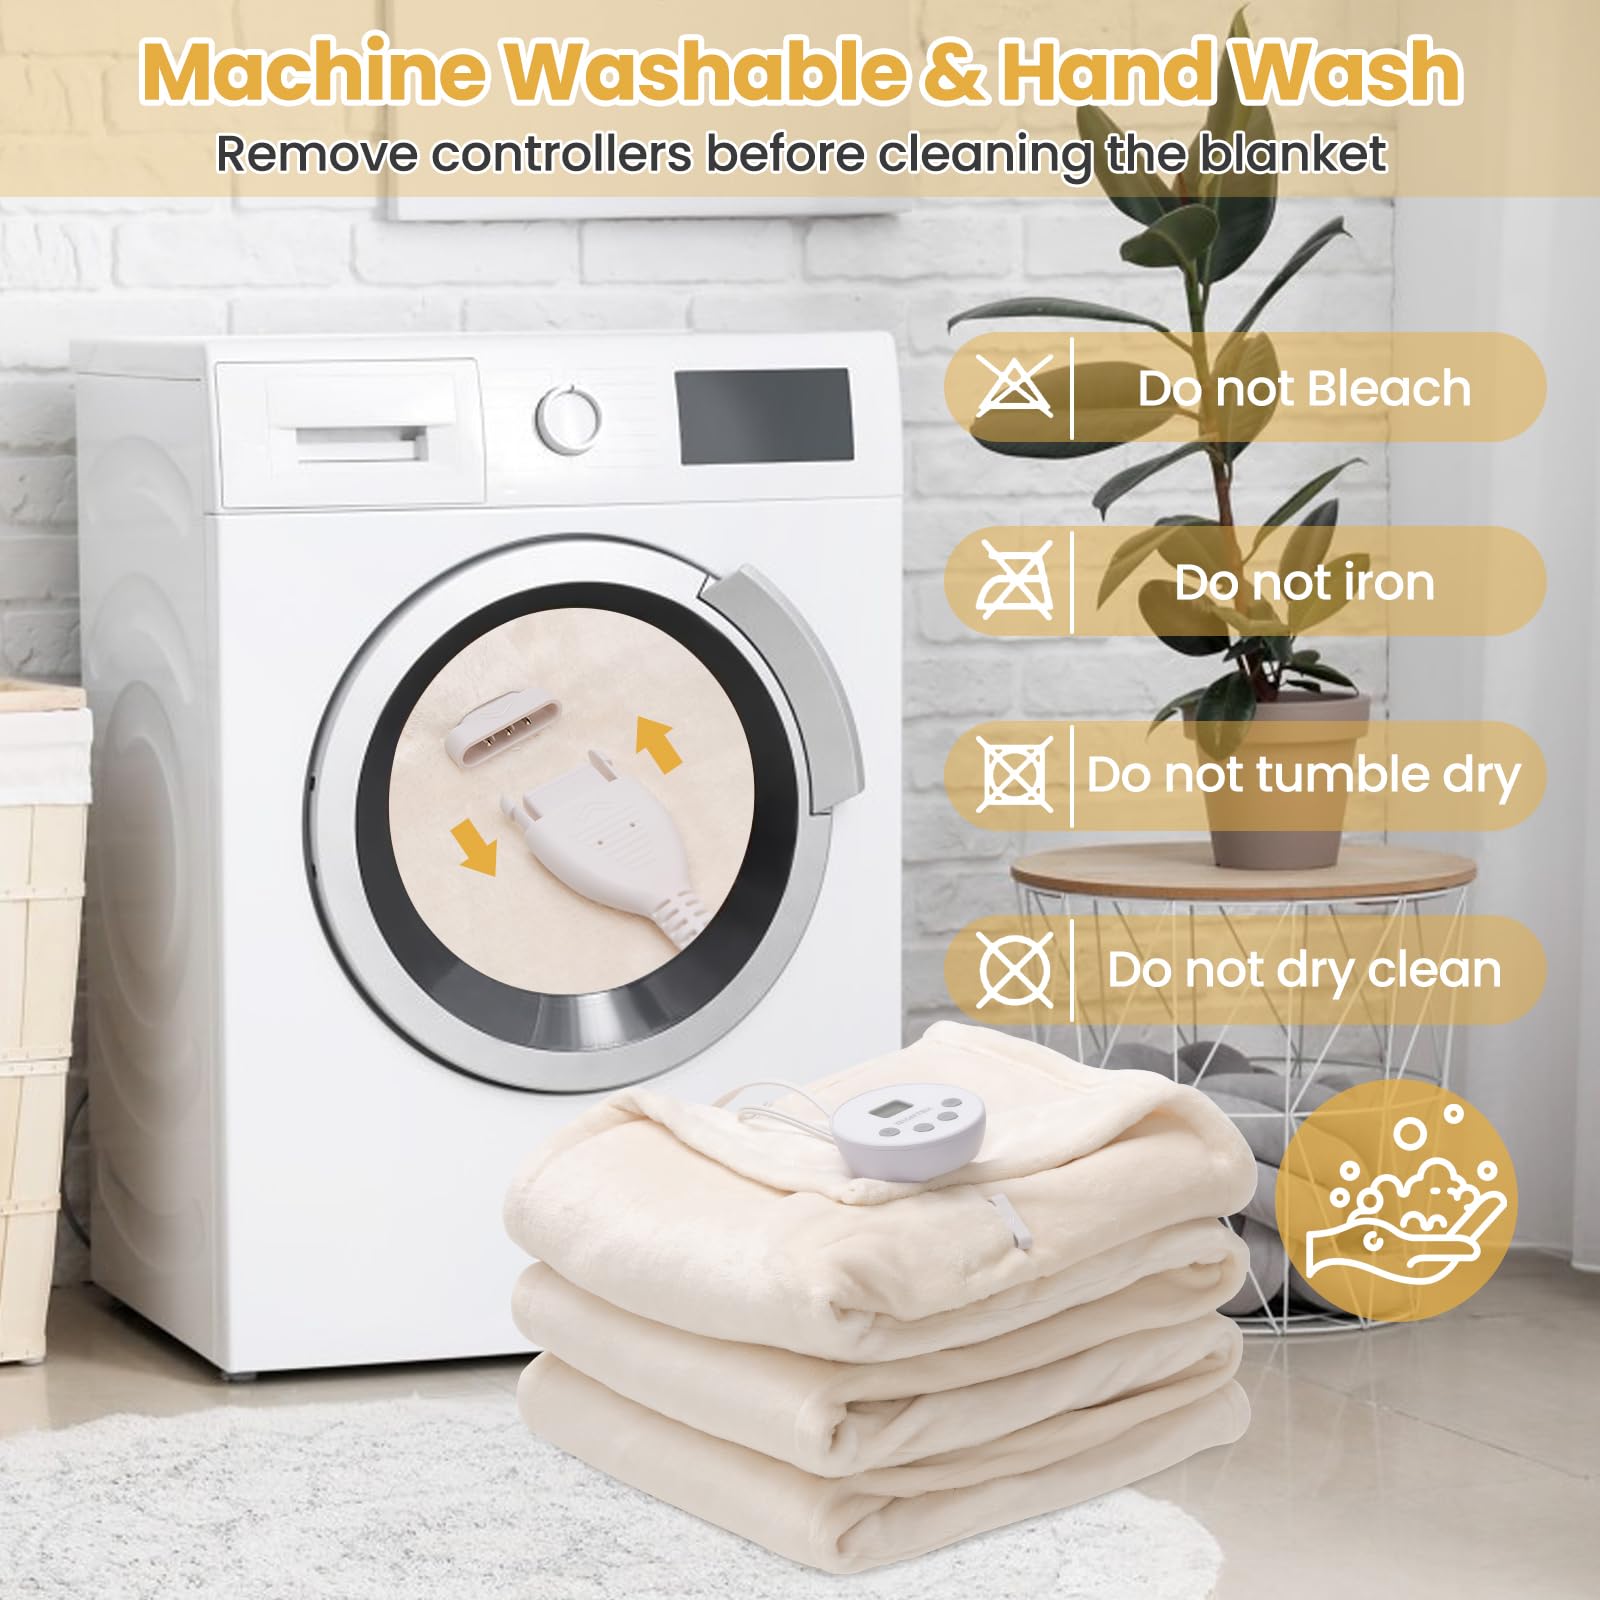 Easy Maintenance, Machine or Hand Wash: Cleaning is a breeze with this heating blanket; it can be machine washed for a thorough clean, or you can opt for a gentle hand wash. The high-quality fabric remains lint-free even after washing. (Note: Remember to detach the controller and let it cool before washing.)